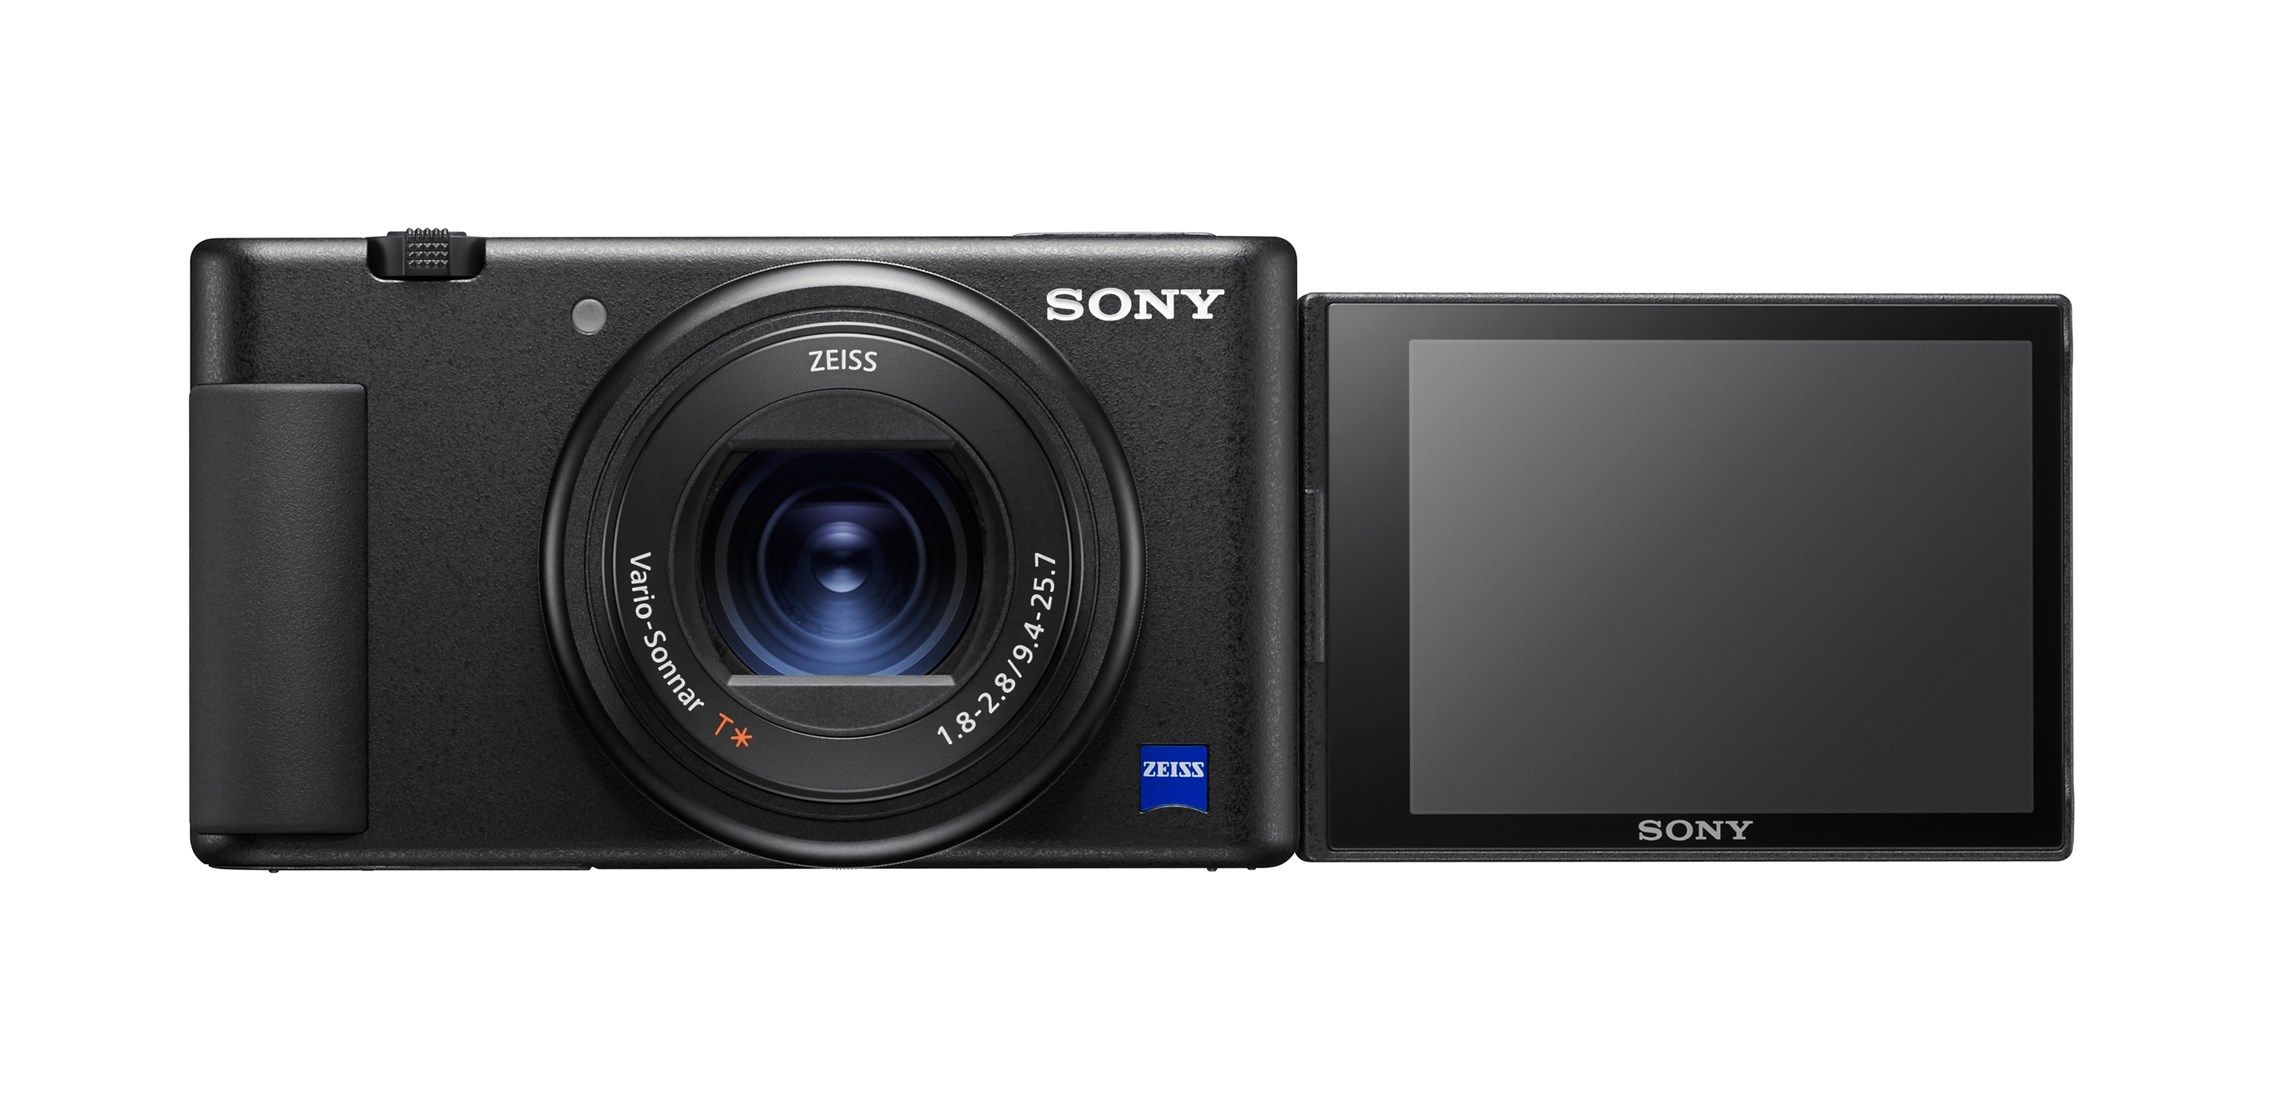 Sony ZV-1 Compact Digital Camera 4K UHD - Black With Wireless Remote Commander GP-VPT2BT - Product Photo 3 - Screen extended